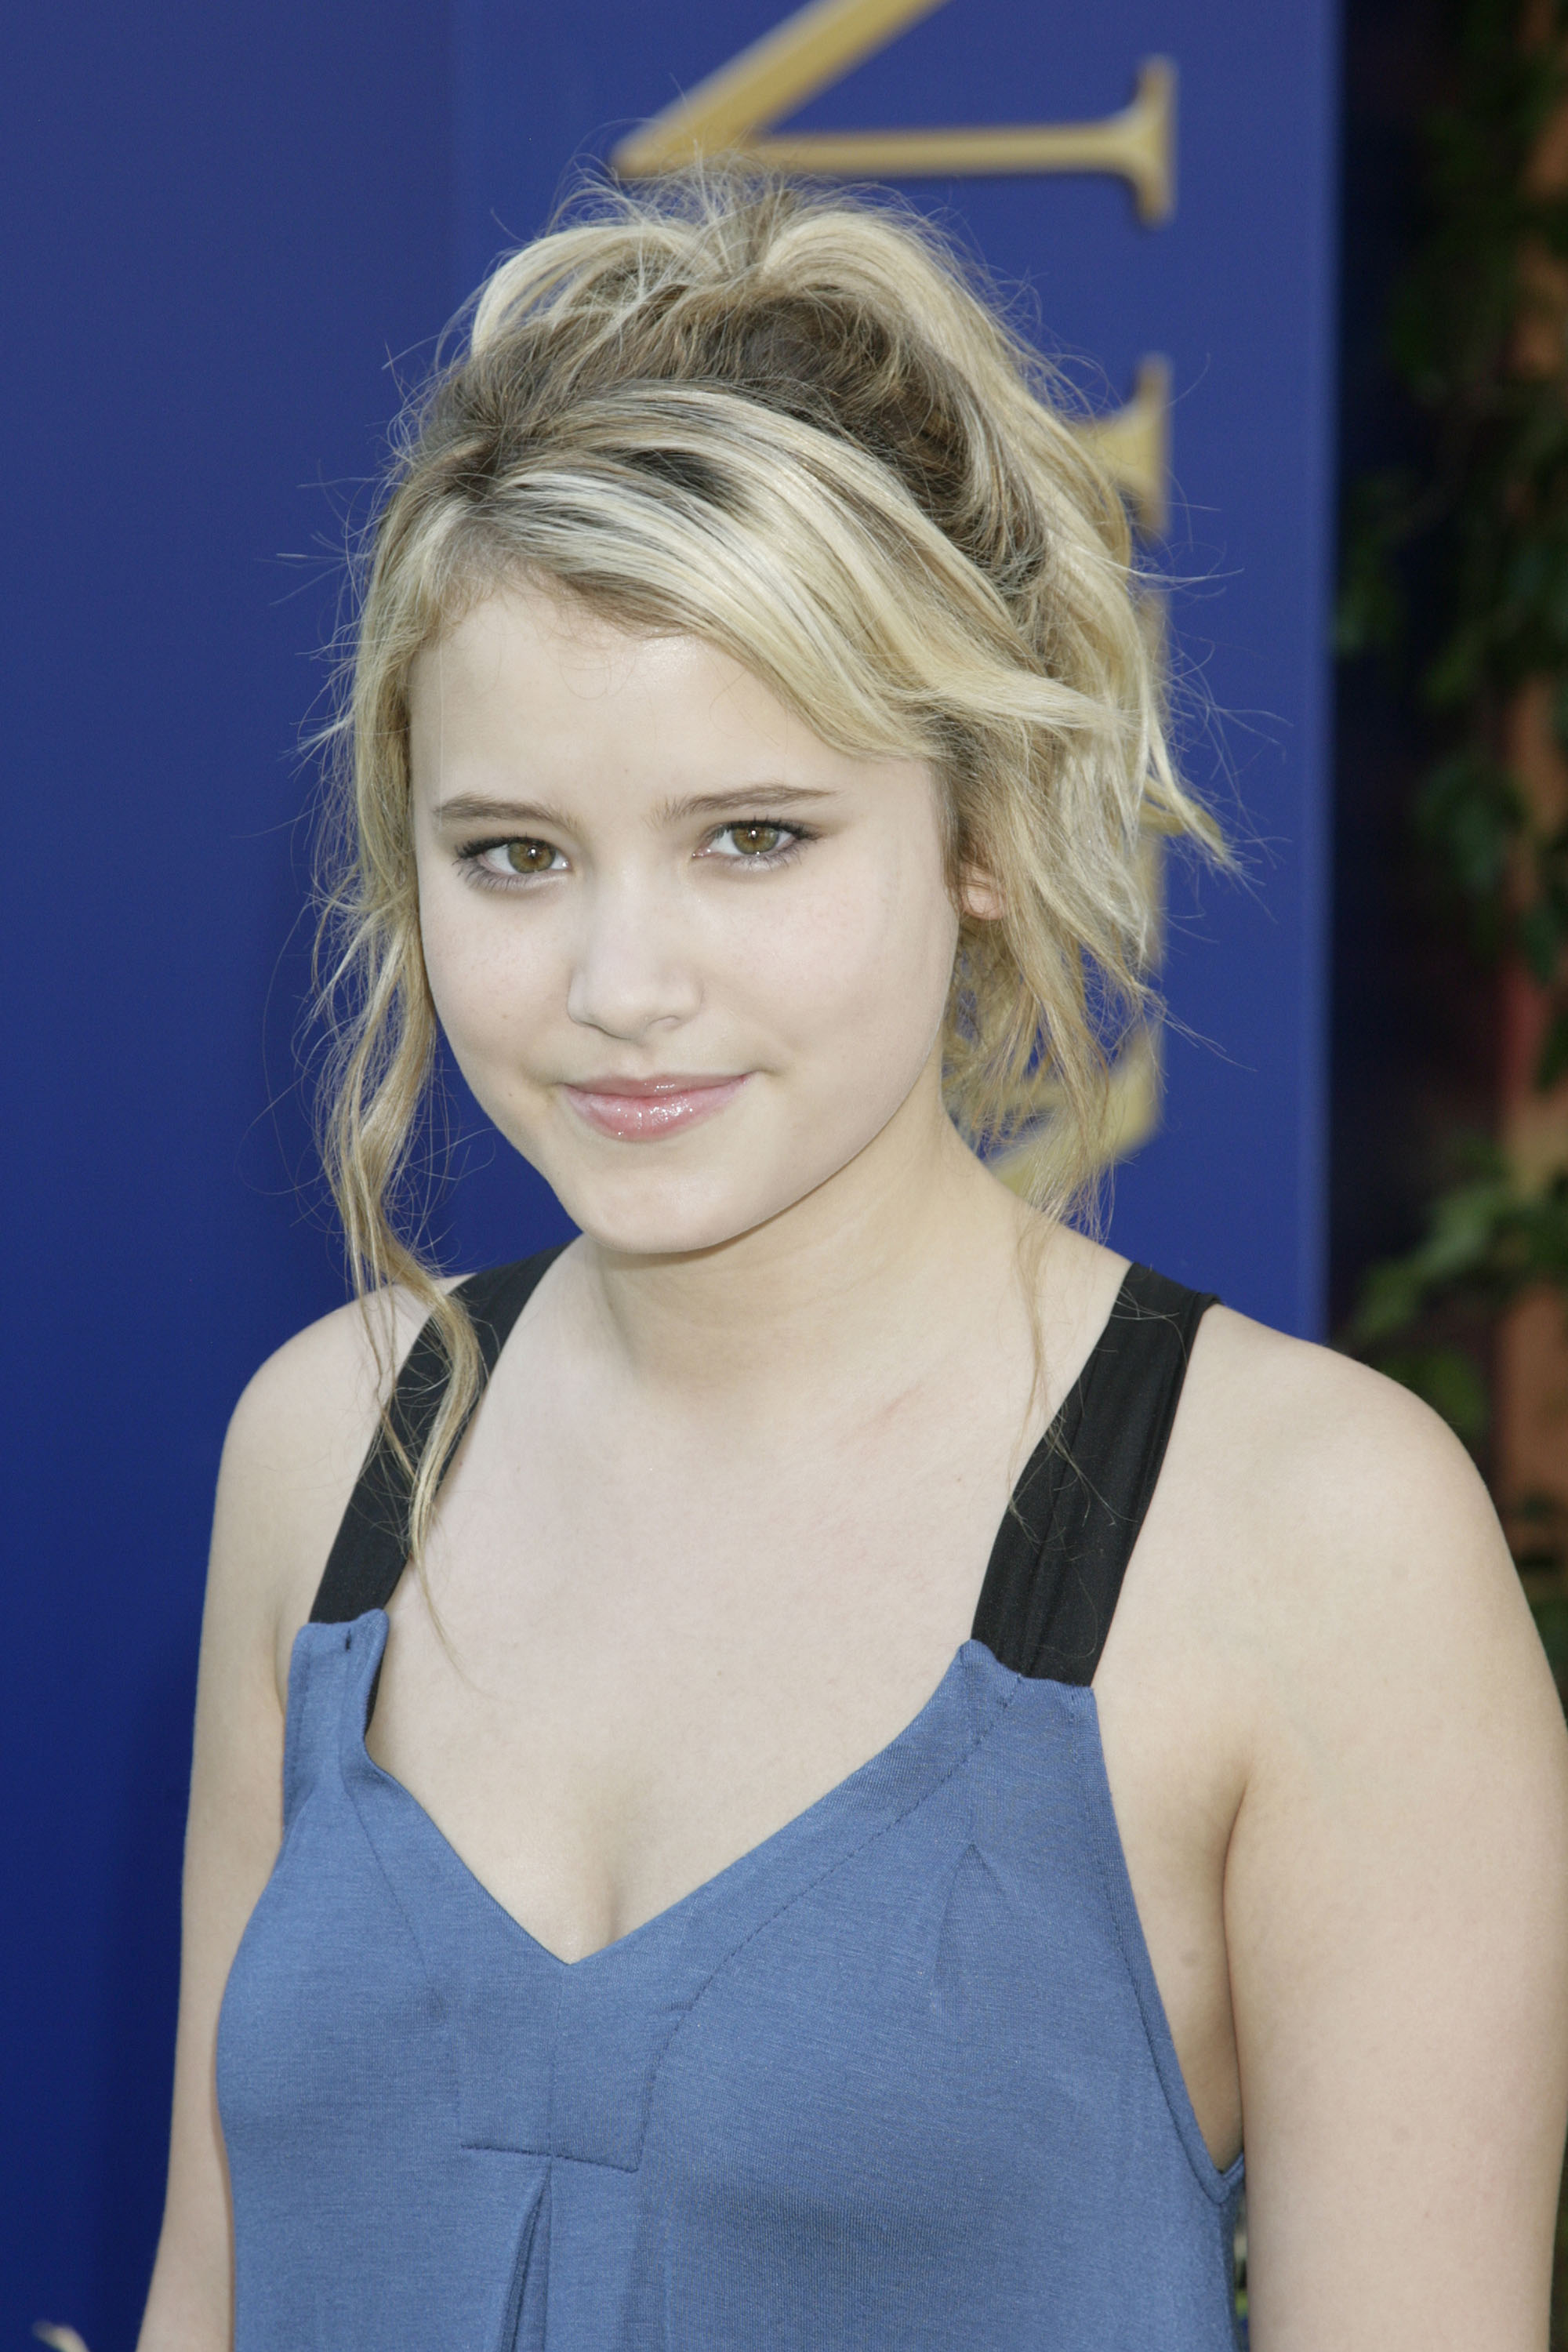 Taylor Spreitler attends the World Premiere of movie The Lion King 3D at the El Capitan Theater on 27th August 2011